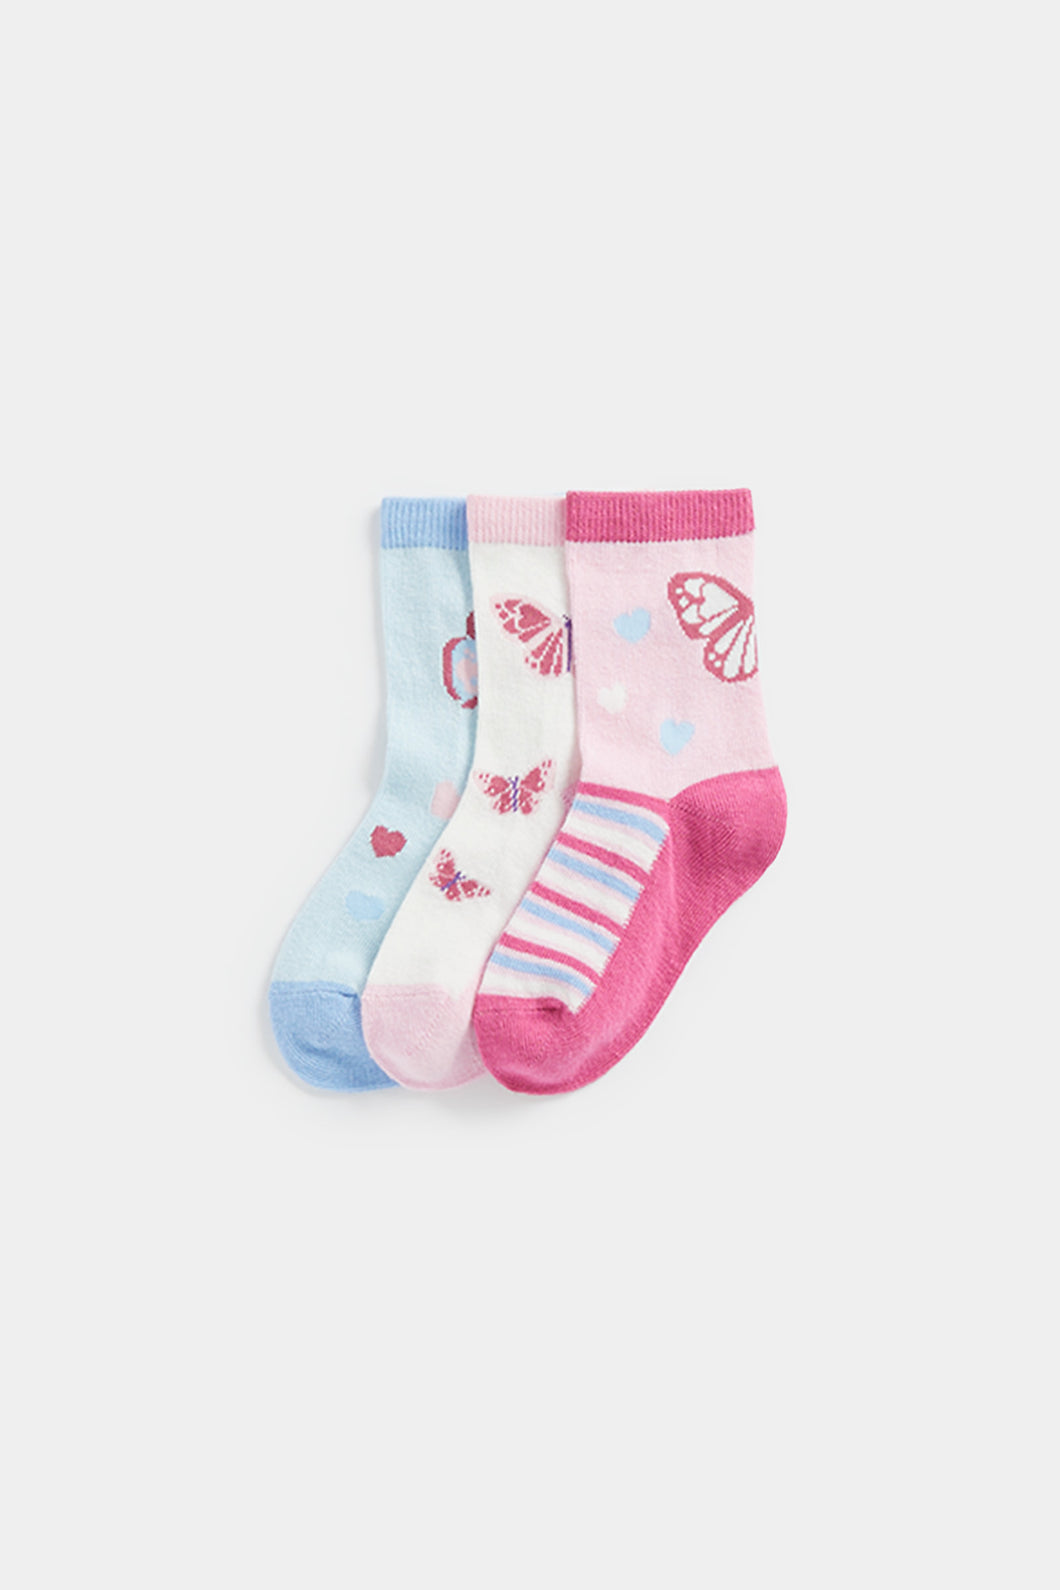 Mothercare Butterfly Socks - 3 Pack